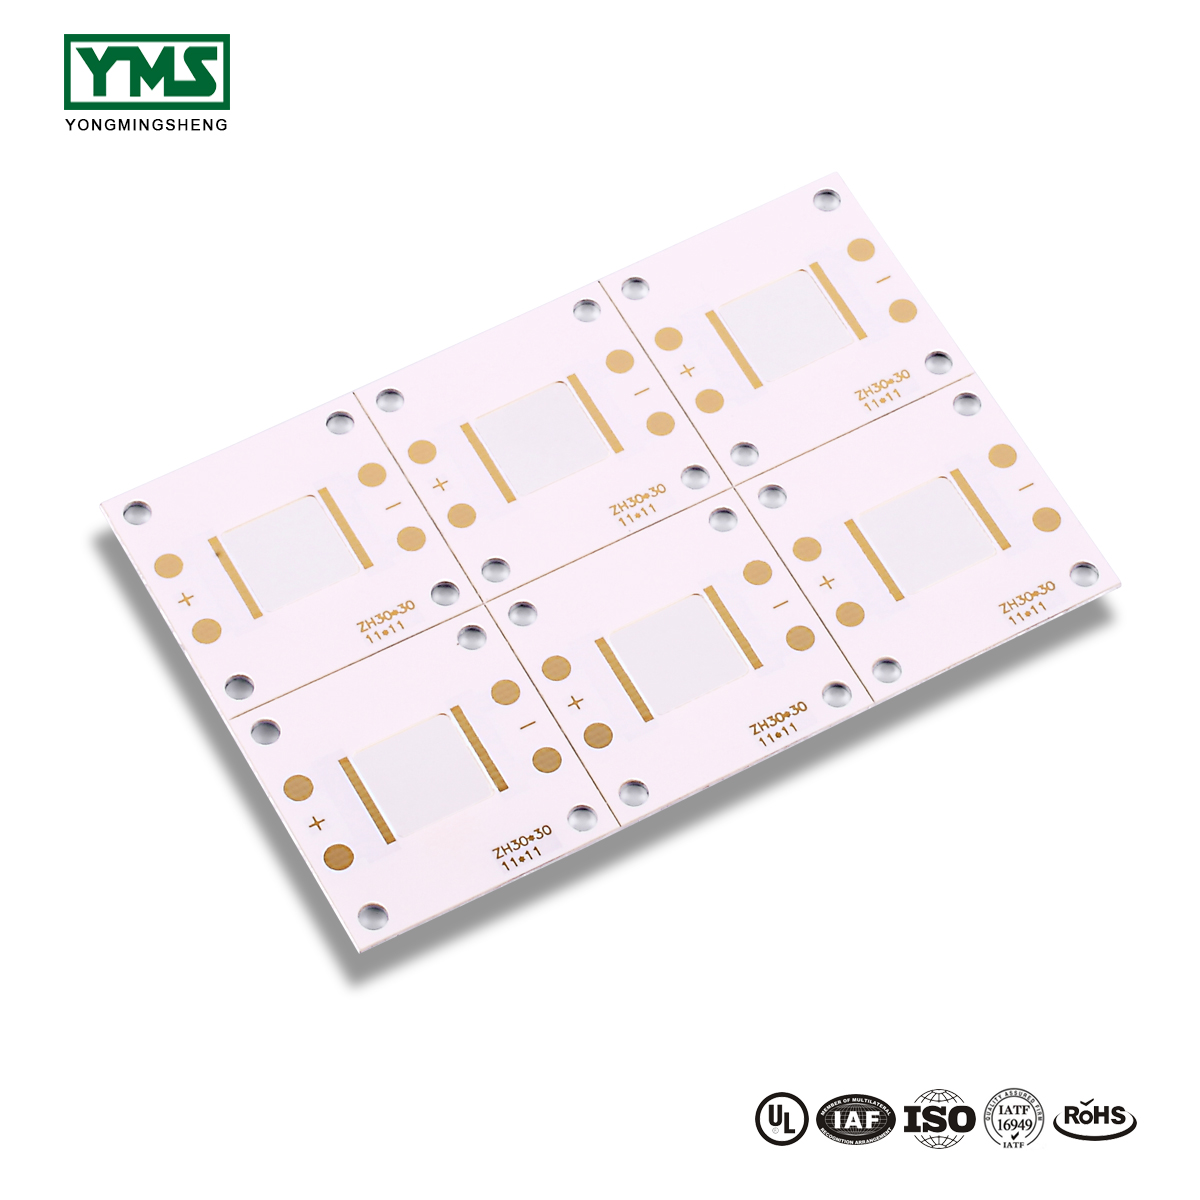 Best-Selling Quick Turn Printed Circuit Board - 1Layer mirror Aluminum Base Board | YMSPCB – Yongmingsheng